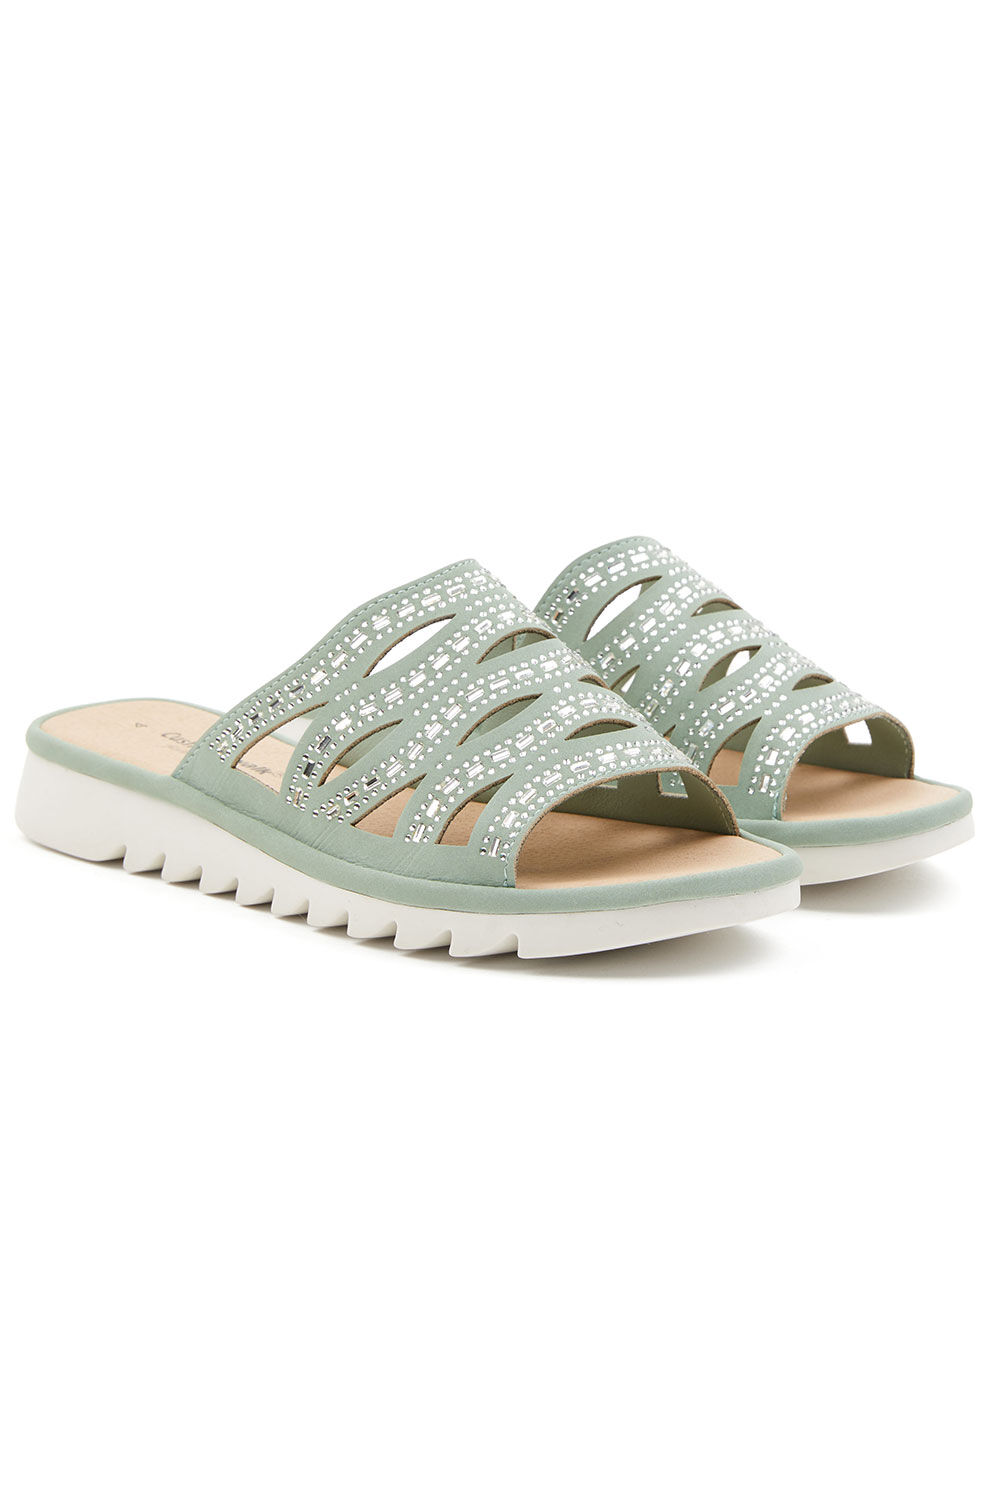 Cushion Walk Green - Cut Out Weave Sandals With Diamante Detail, Size: 4